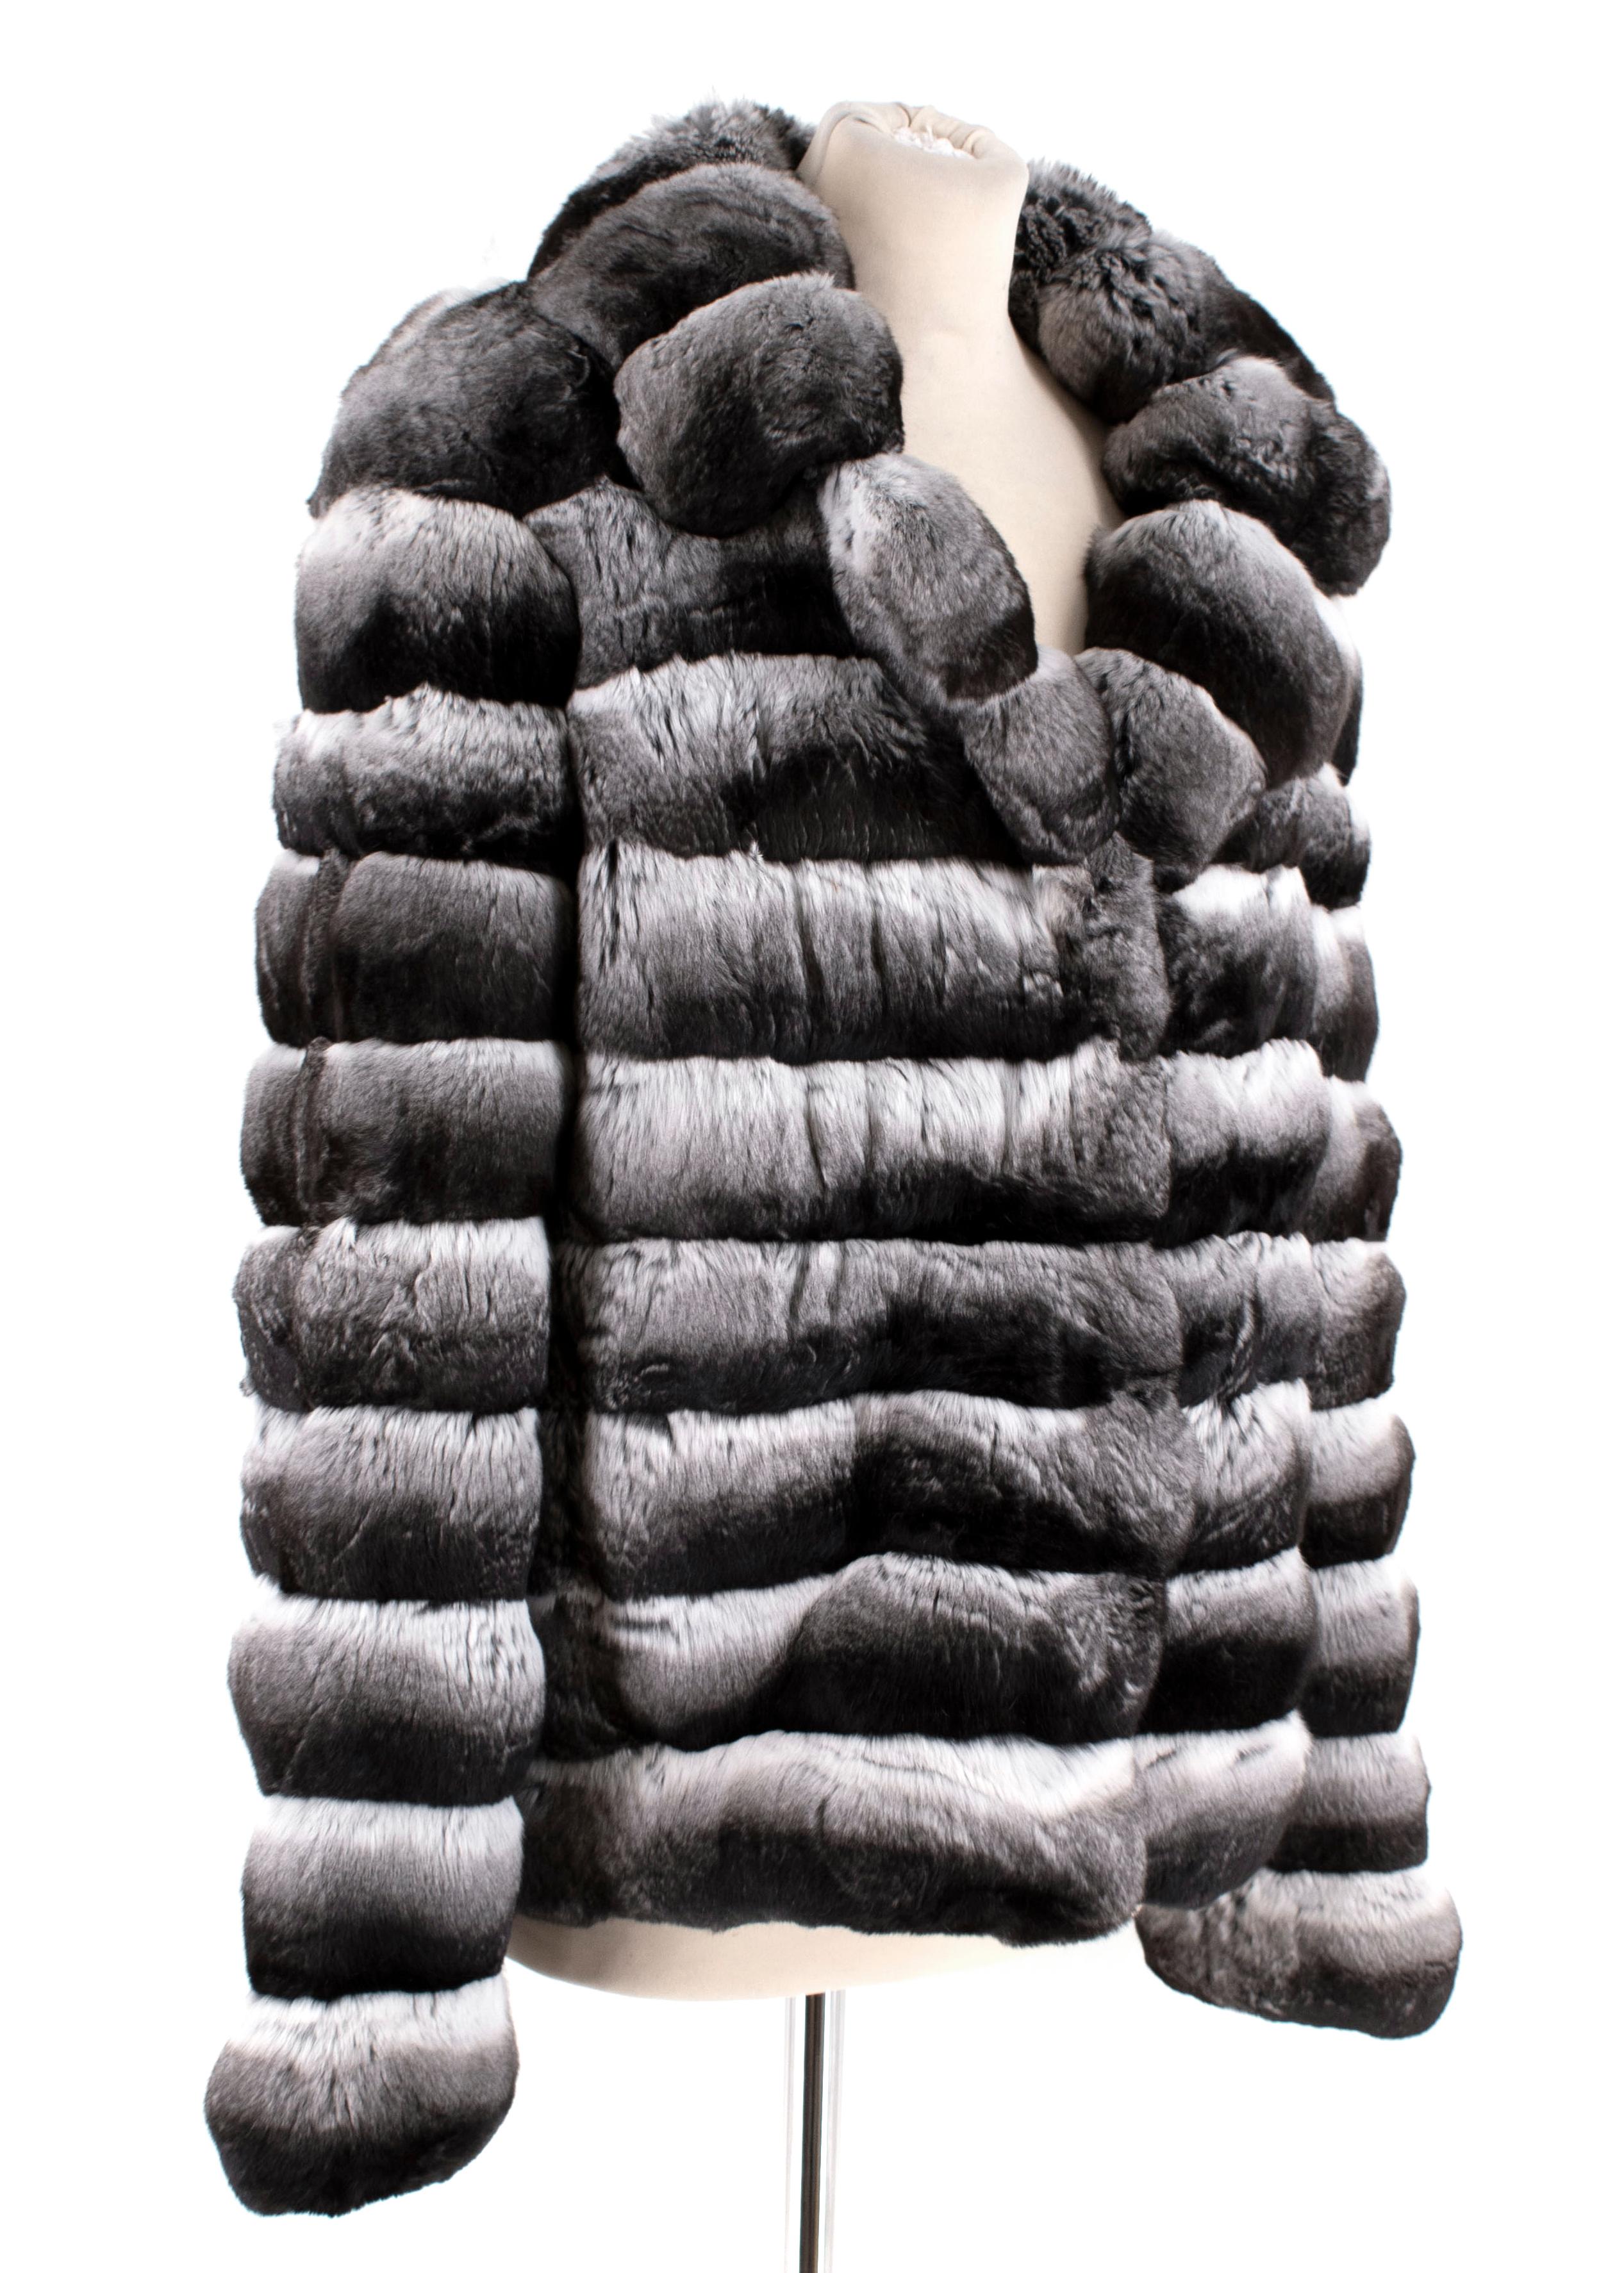 Bloomingdales x Maximilian Chinchilla Fur coat

- Luxuriously soft fine fur
- Gradient colours in black, grey & white
- Silk black lining
- Hook fastening
- Heavy weight material
- Very warm perfect for winter months


Made in China

Fabric